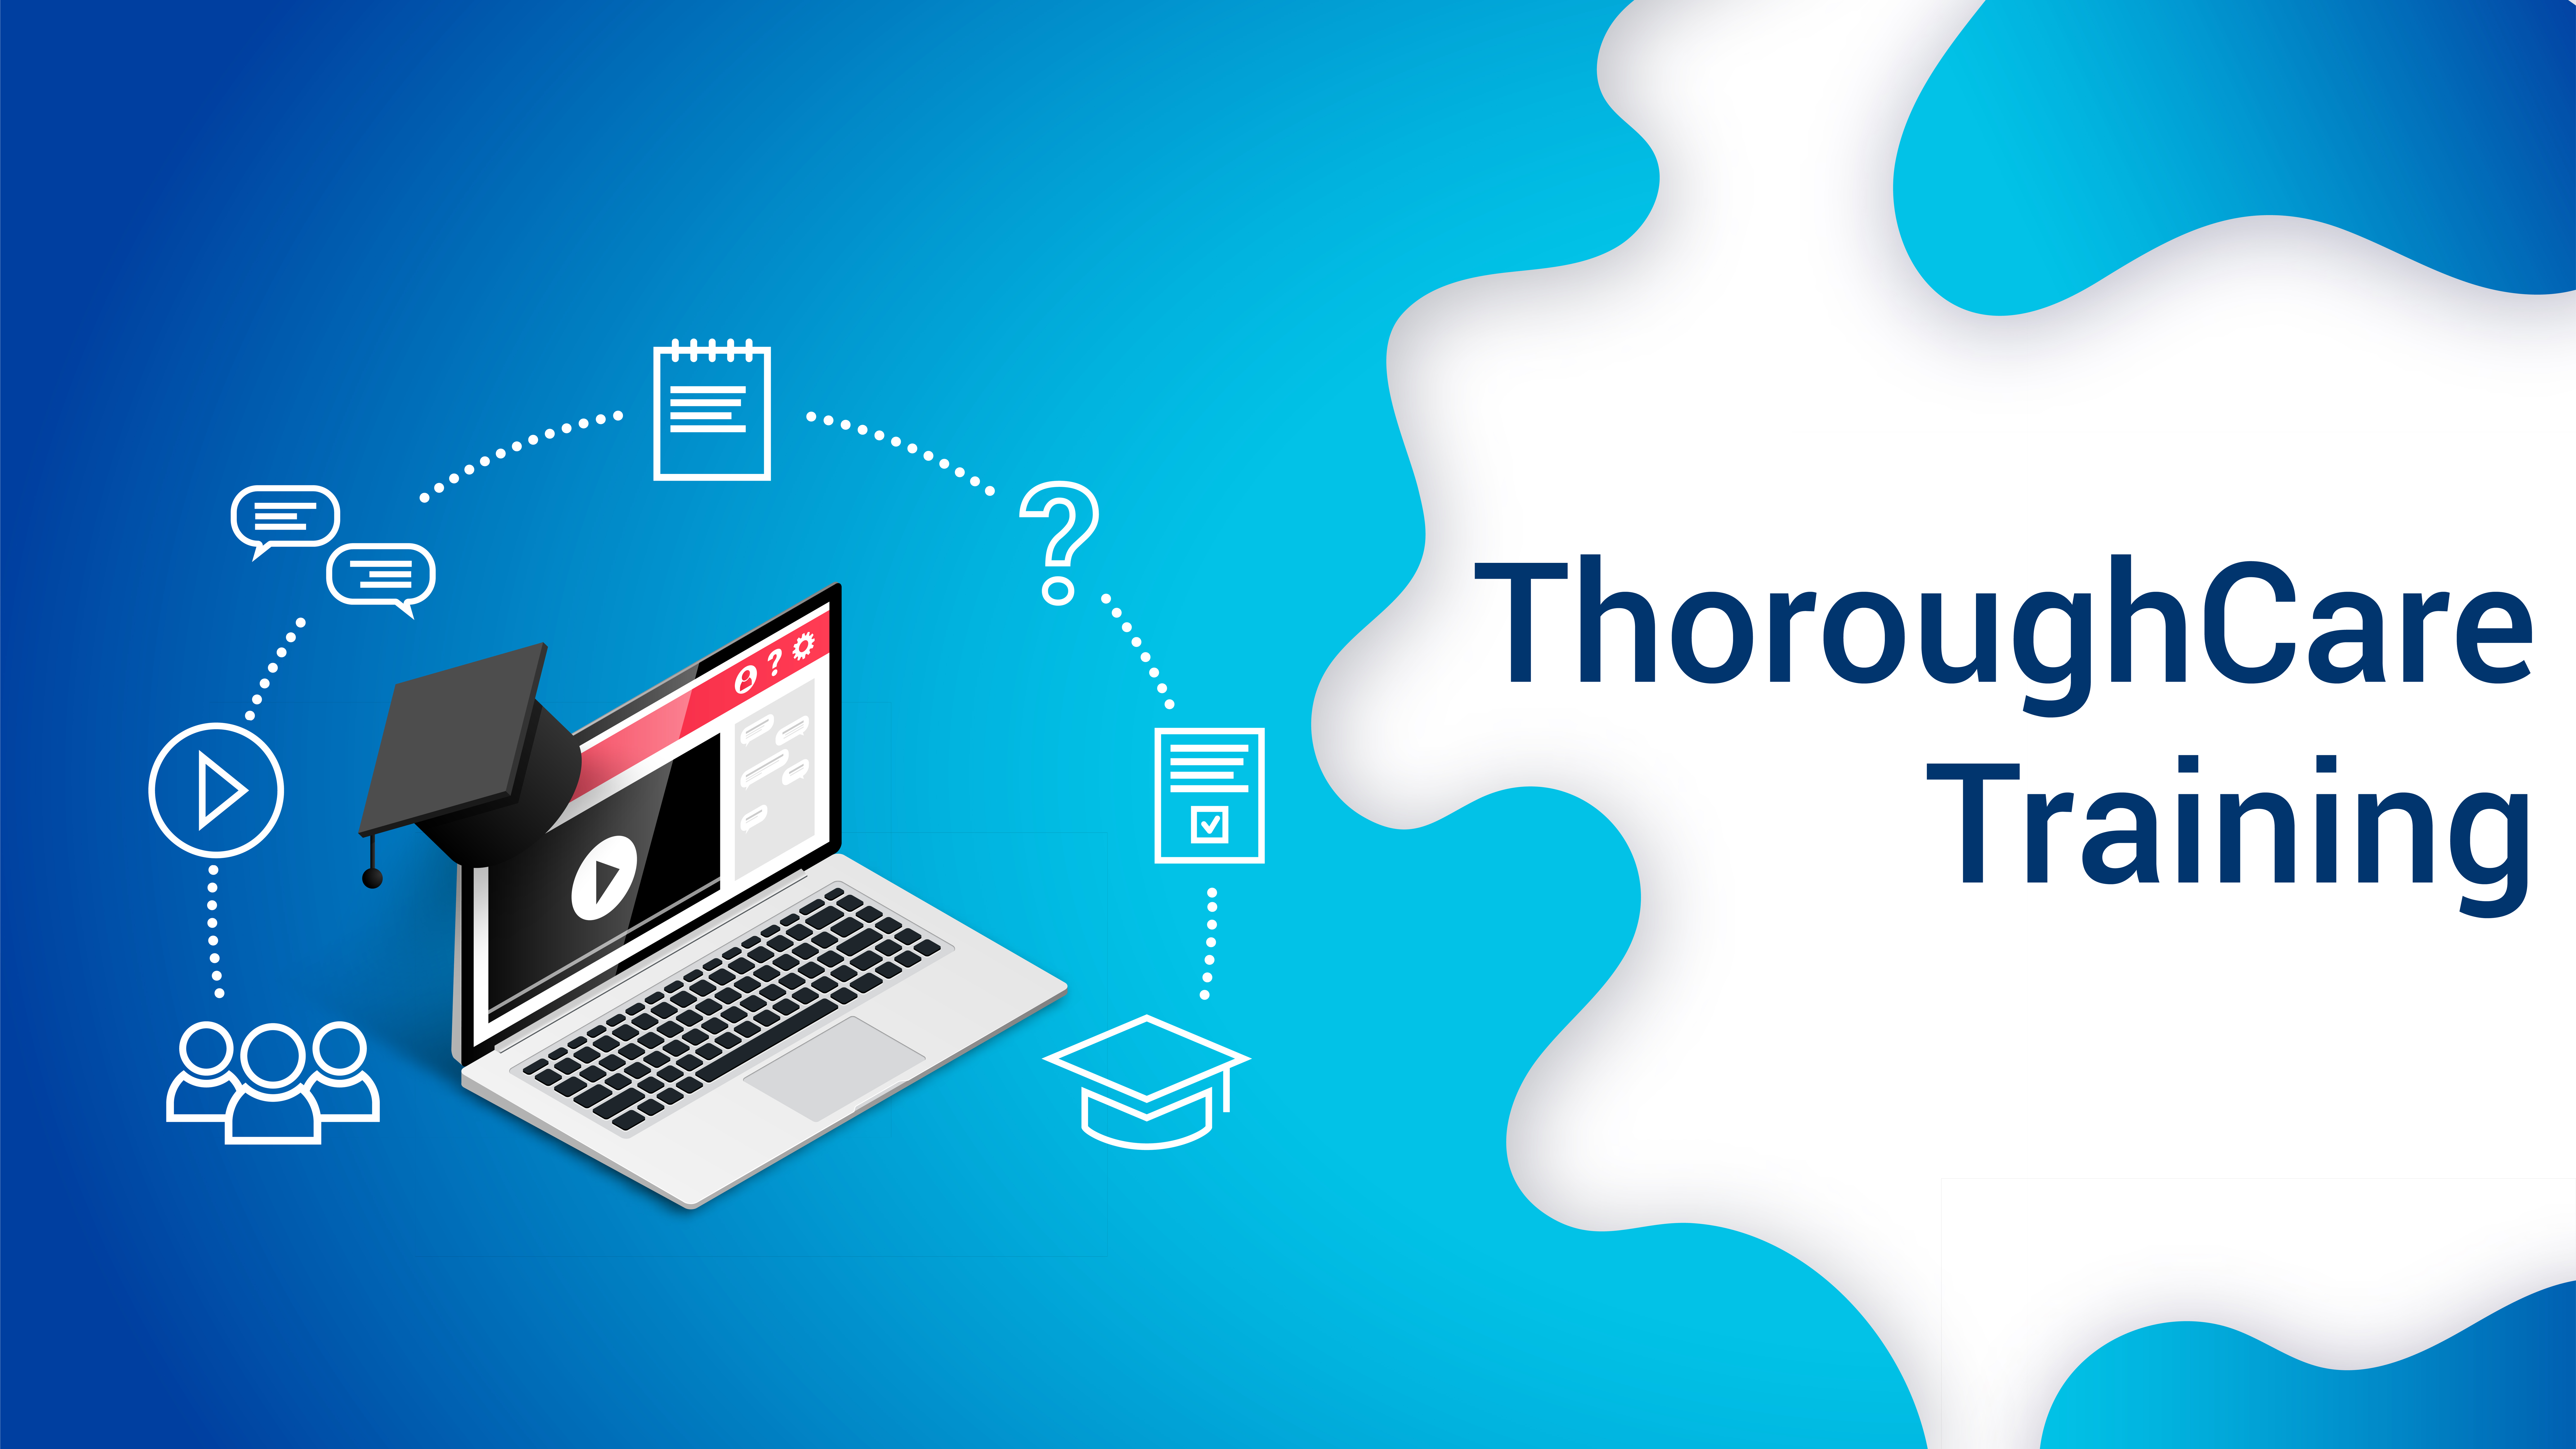 What To Expect During ThoroughCare Training